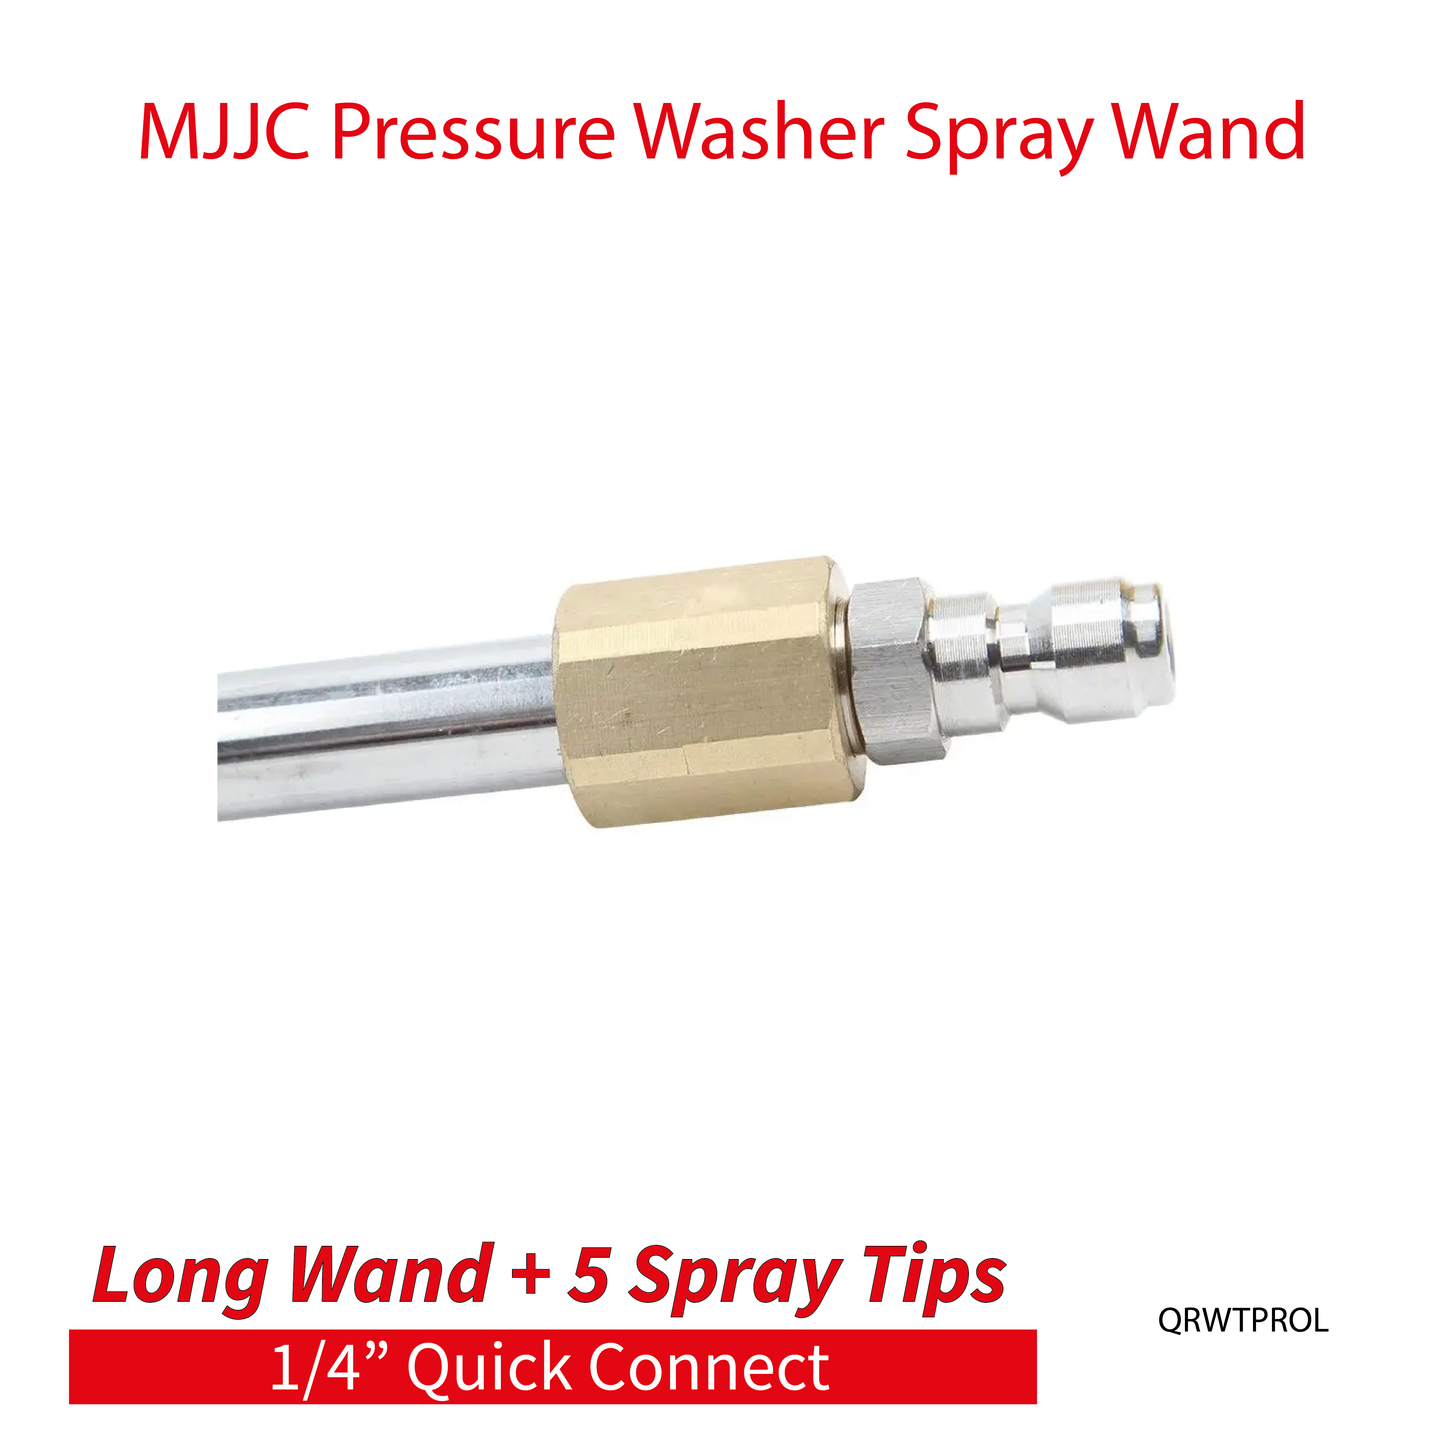 MJJC Light Weight Pressure Washer Long Spray Wand 1/4" Quick Connect